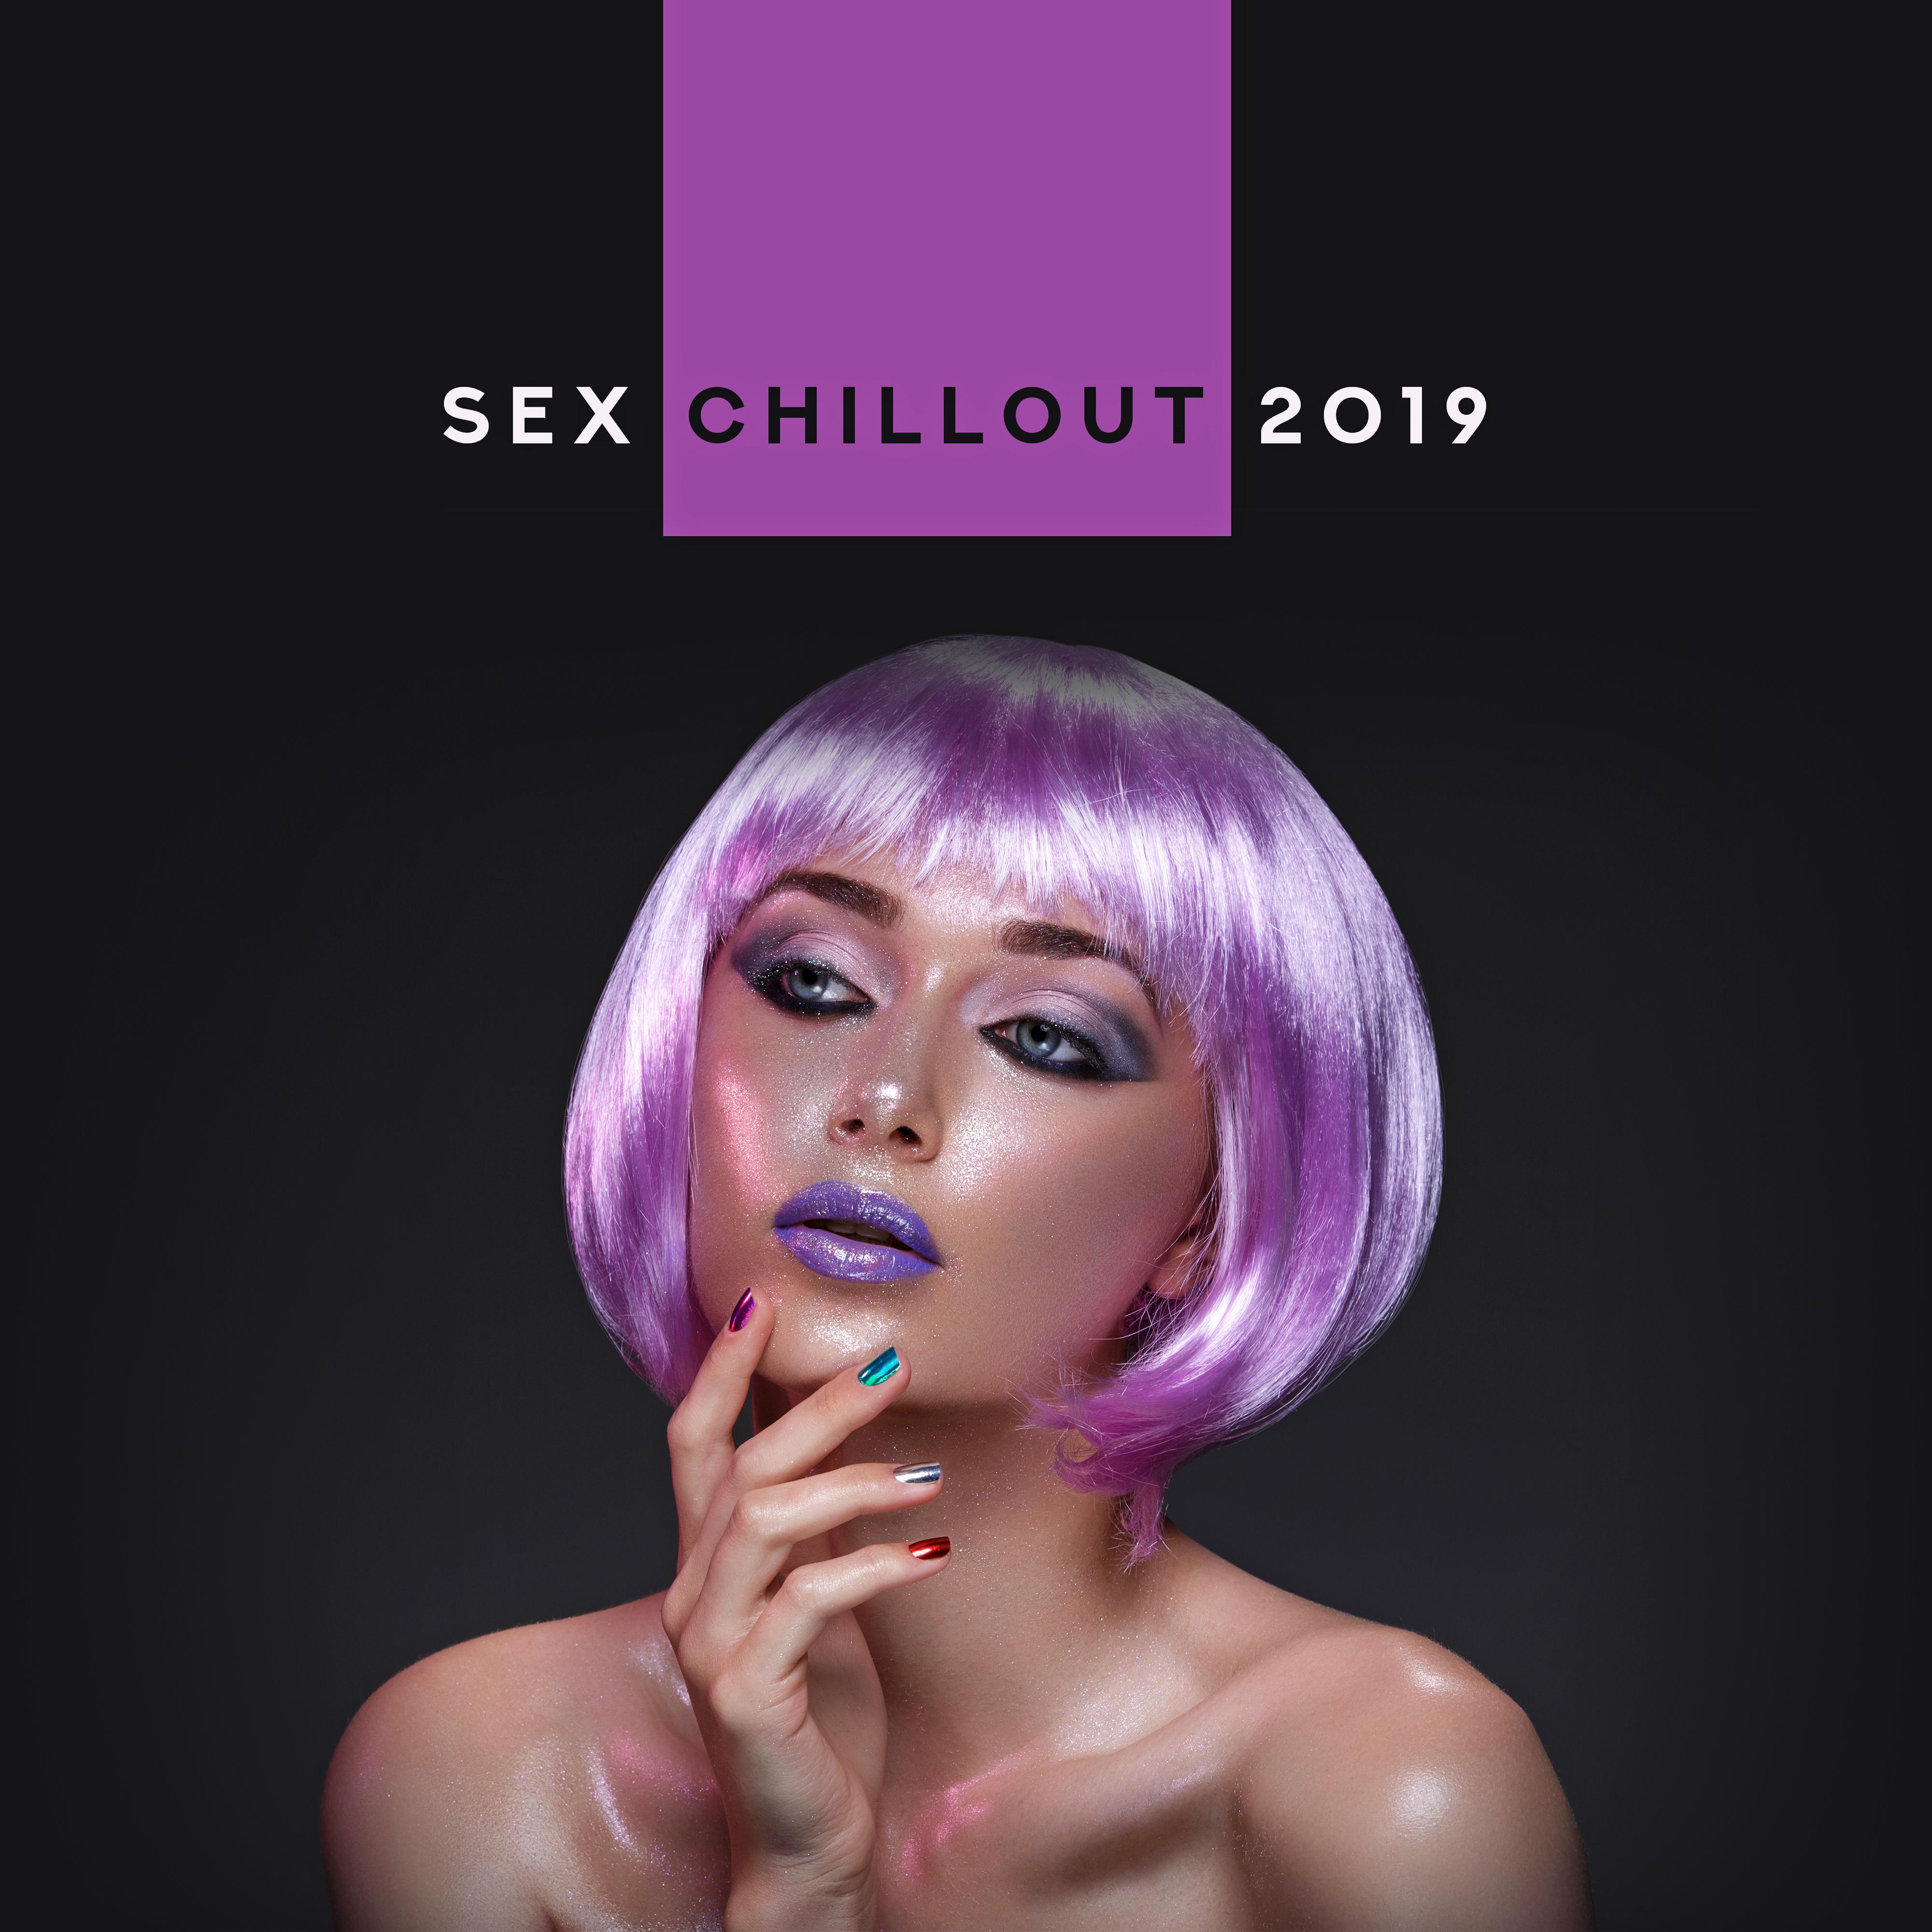 Chillout 2019  Compilation of Best Chill Out Sensual Erotic Beats for Lovers, Music for Hot Evening, Massage, Bath Together, Tantric  Vibes